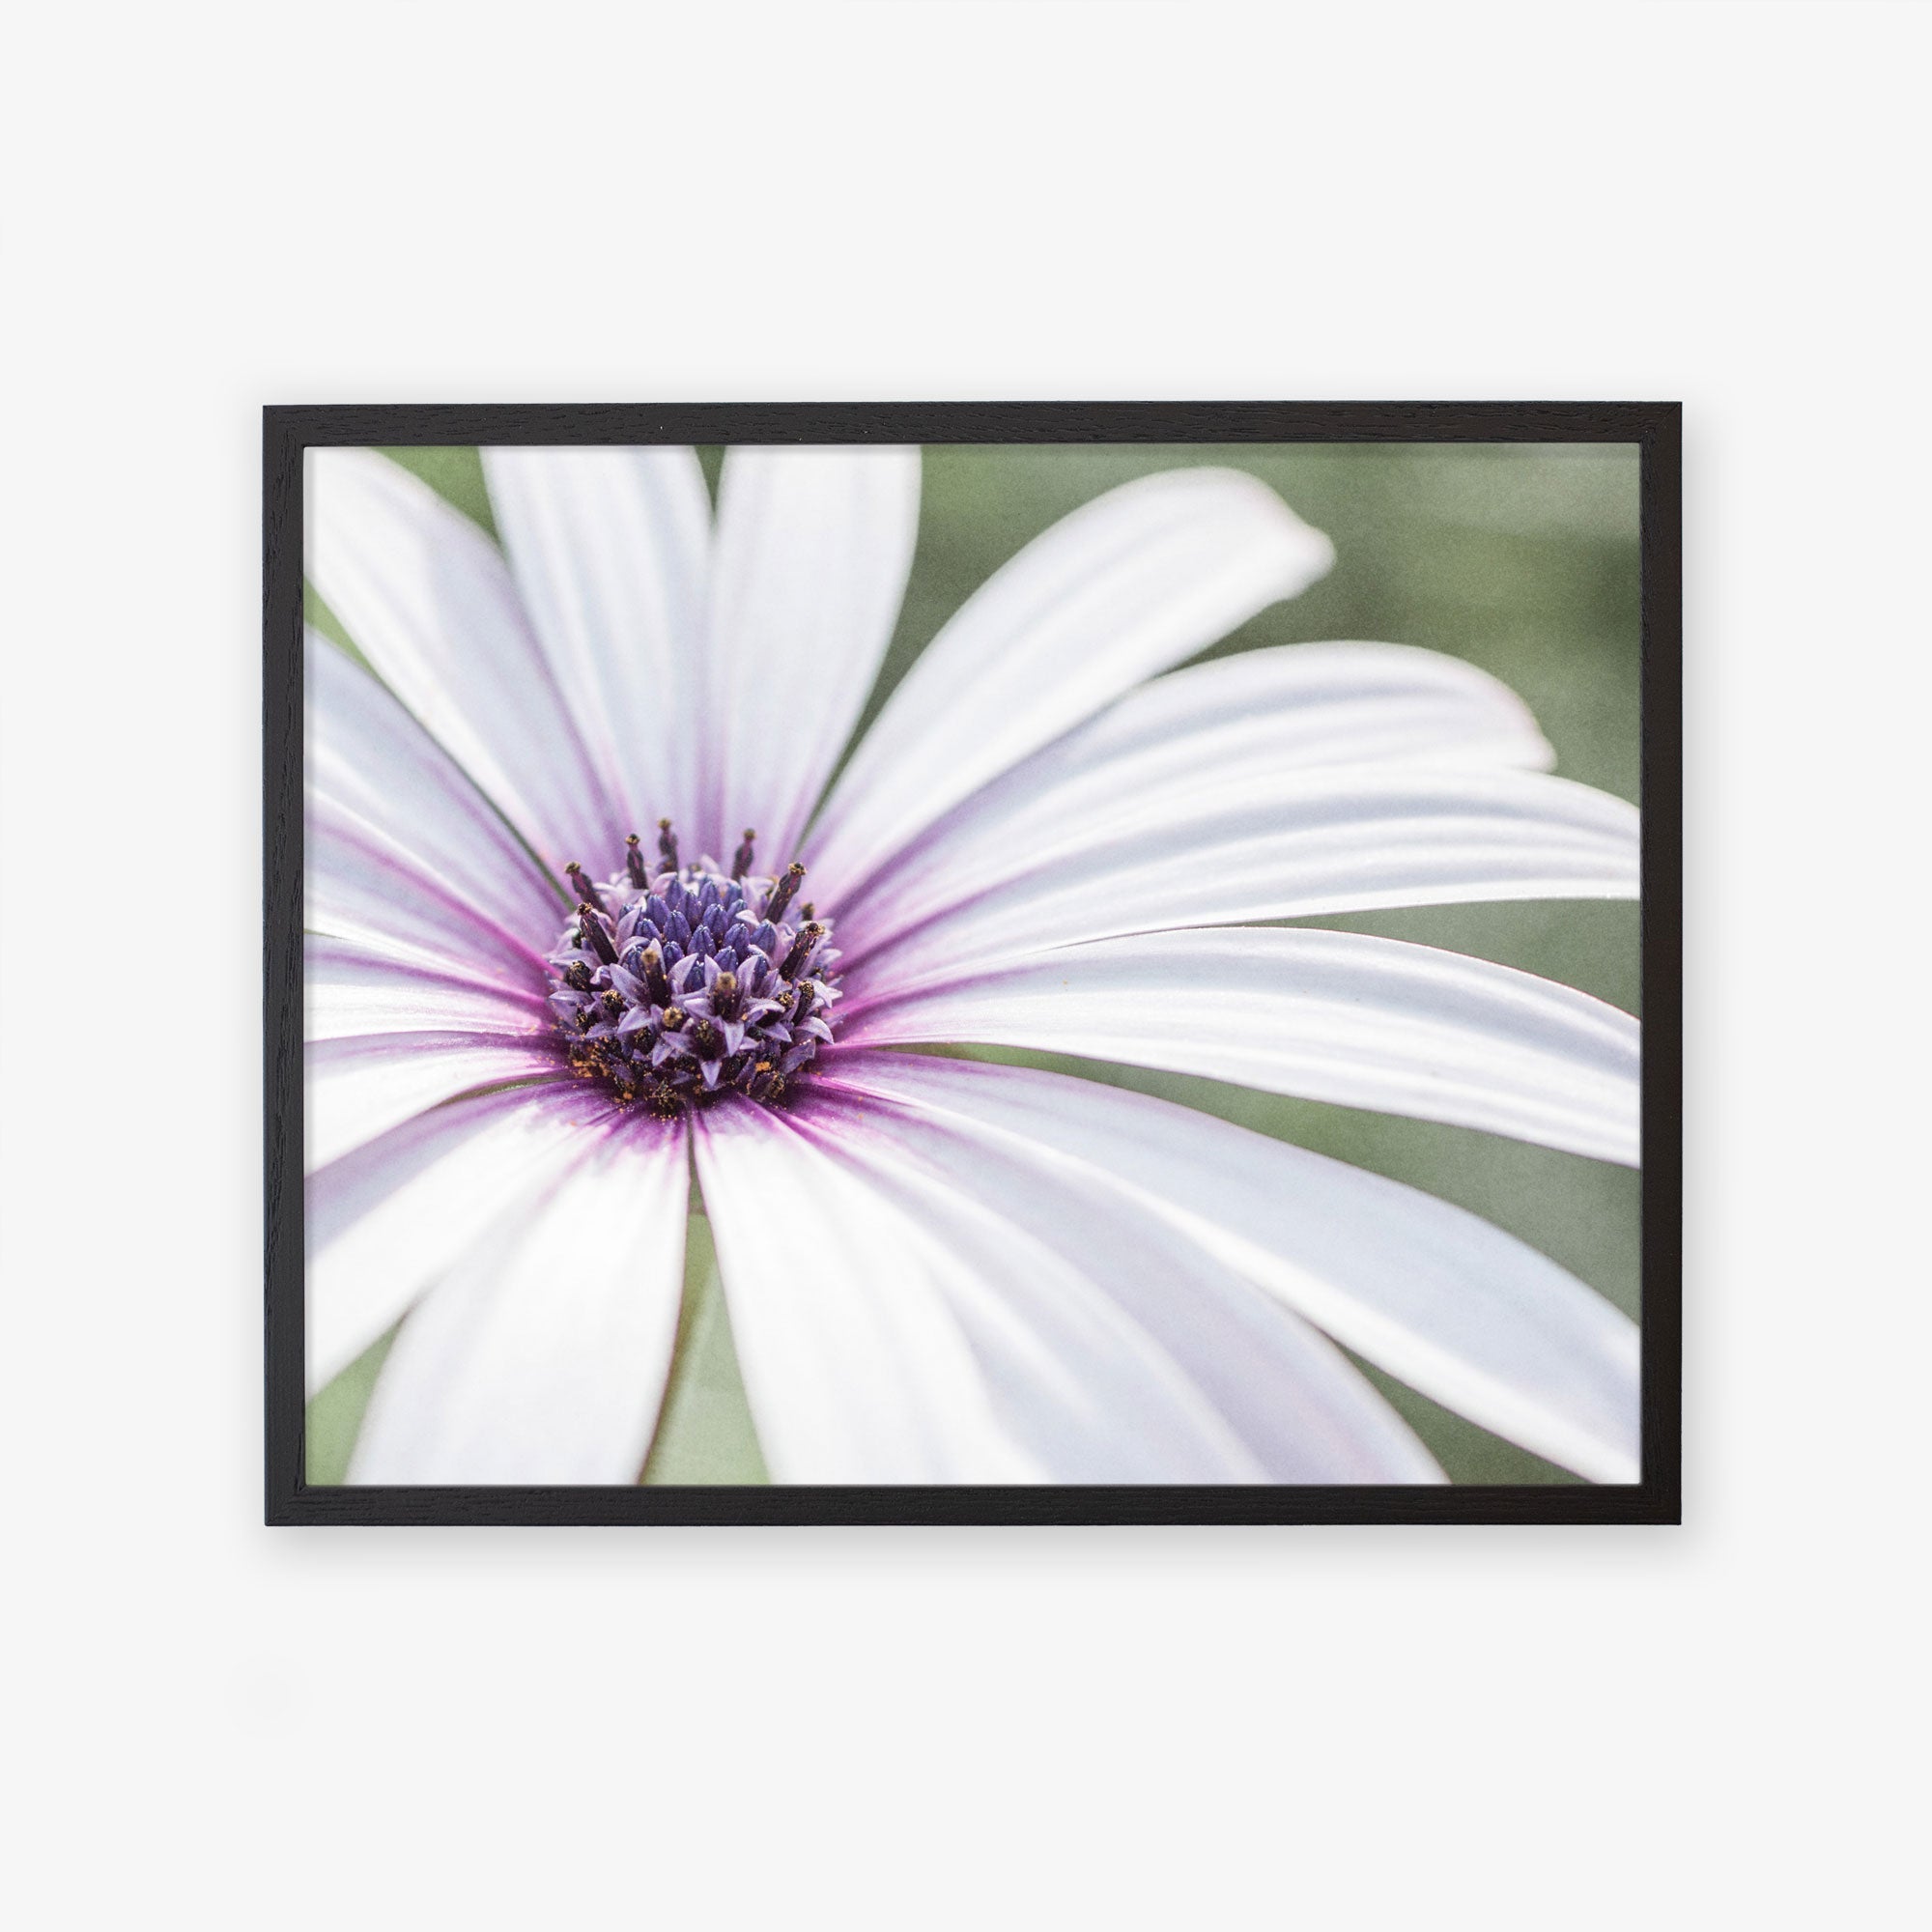 An unframed image of a Large White Daisy Flower Print, &#39;Bed of Petals&#39; by Offley Green, with purple stripes radiating from its central violet cluster, set against a blurred green background.